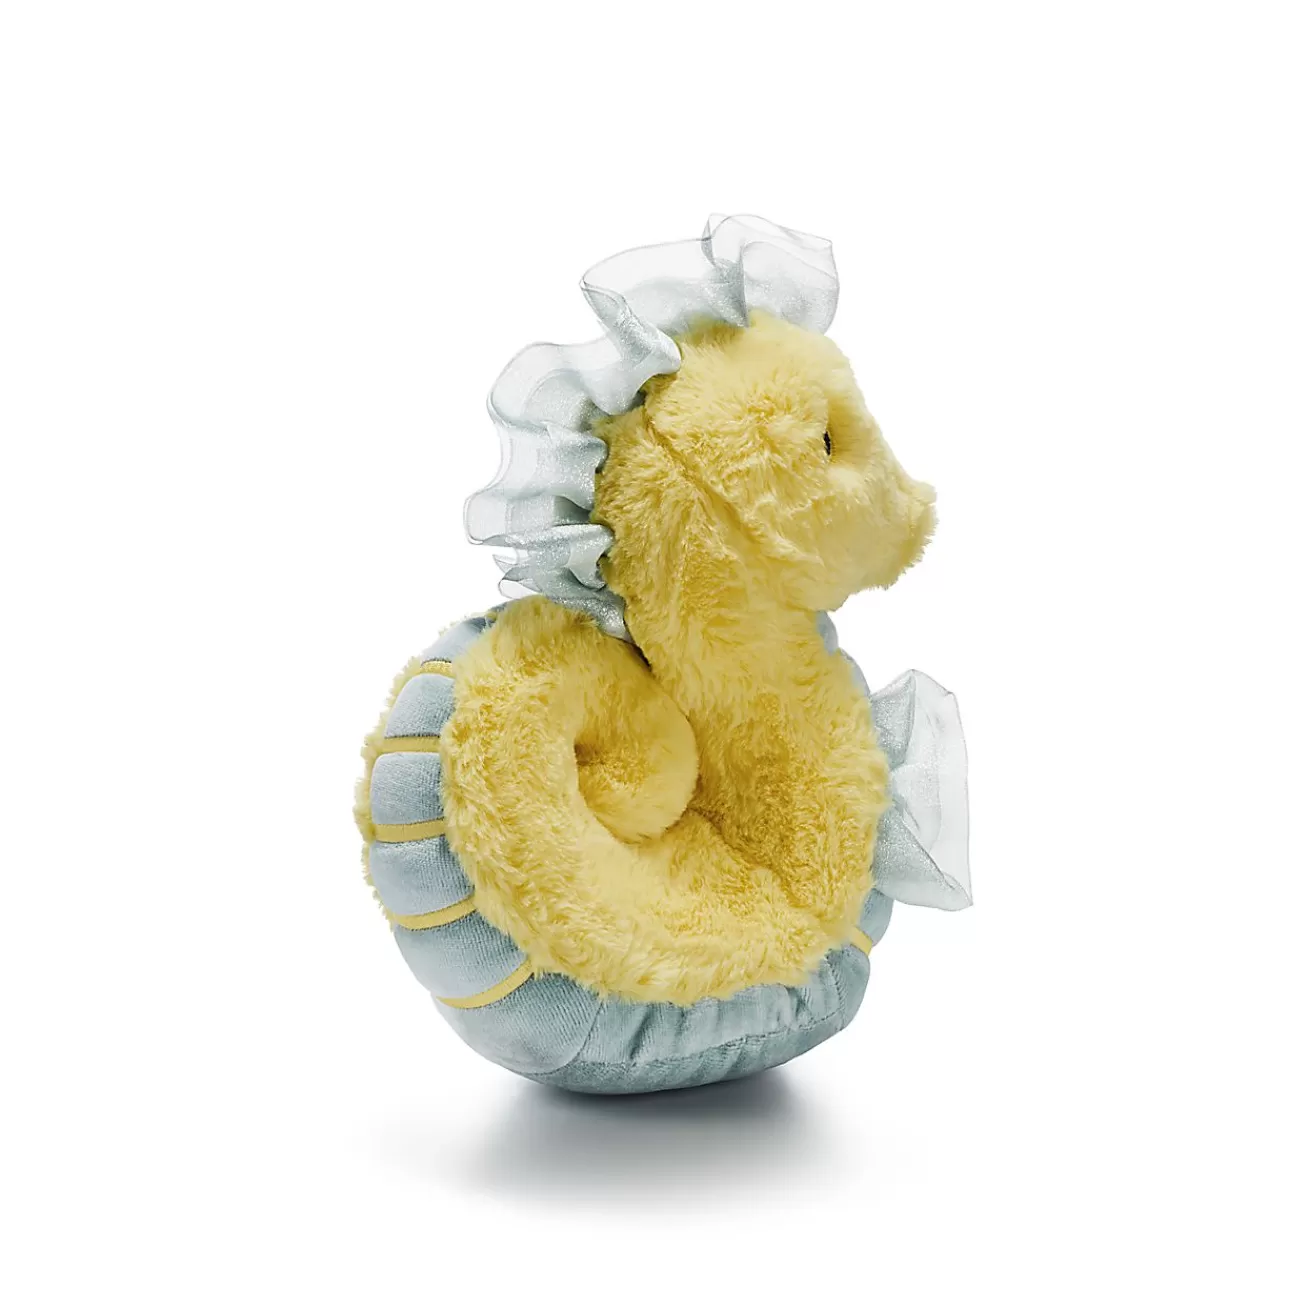 Tiffany & Co. Tiny Tiffany Seahorse Plush Toy in a Cotton Blend | ^ Baby | Baby